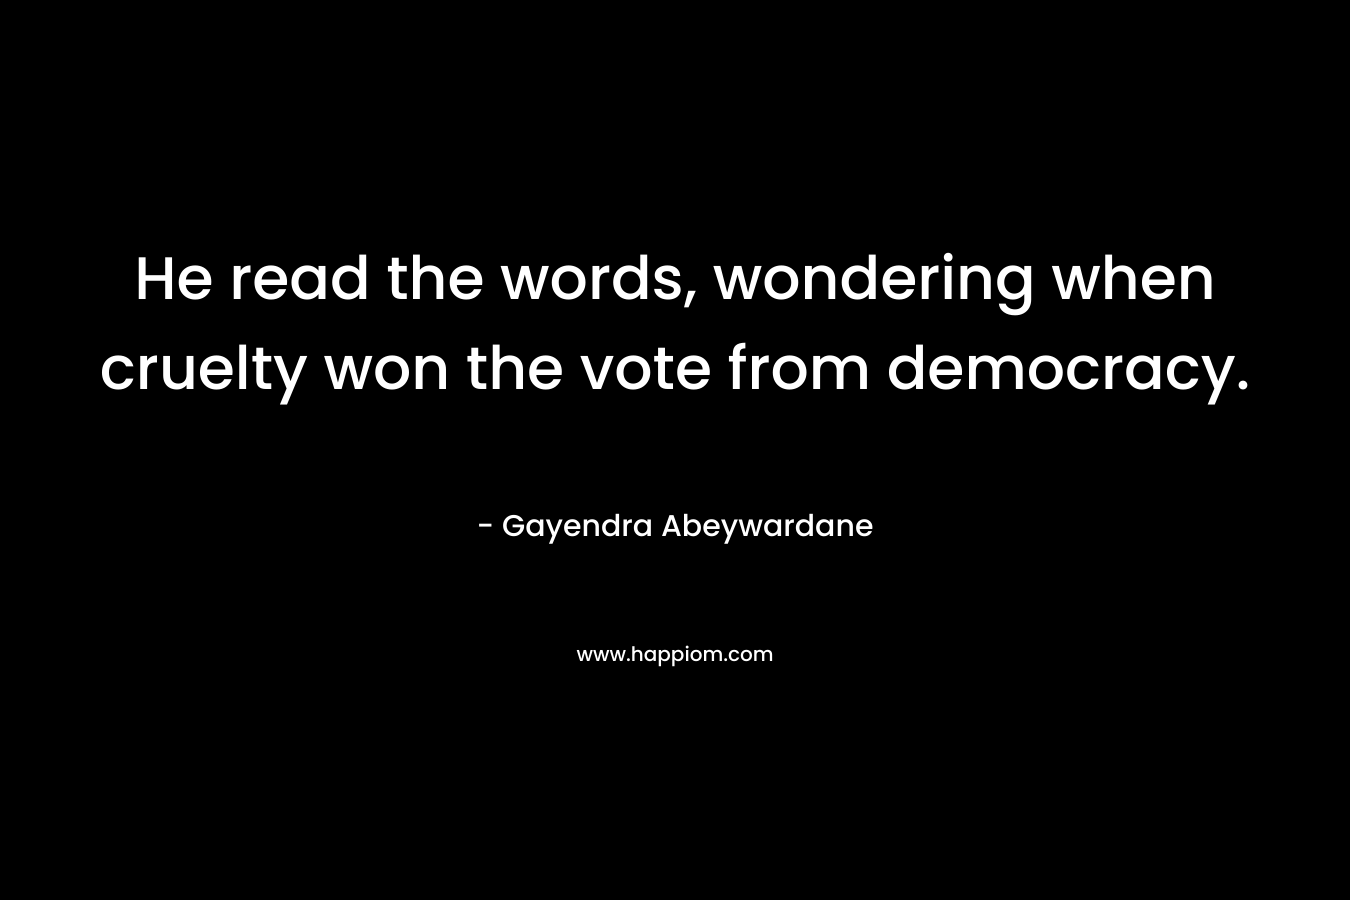 He read the words, wondering when cruelty won the vote from democracy. – Gayendra Abeywardane